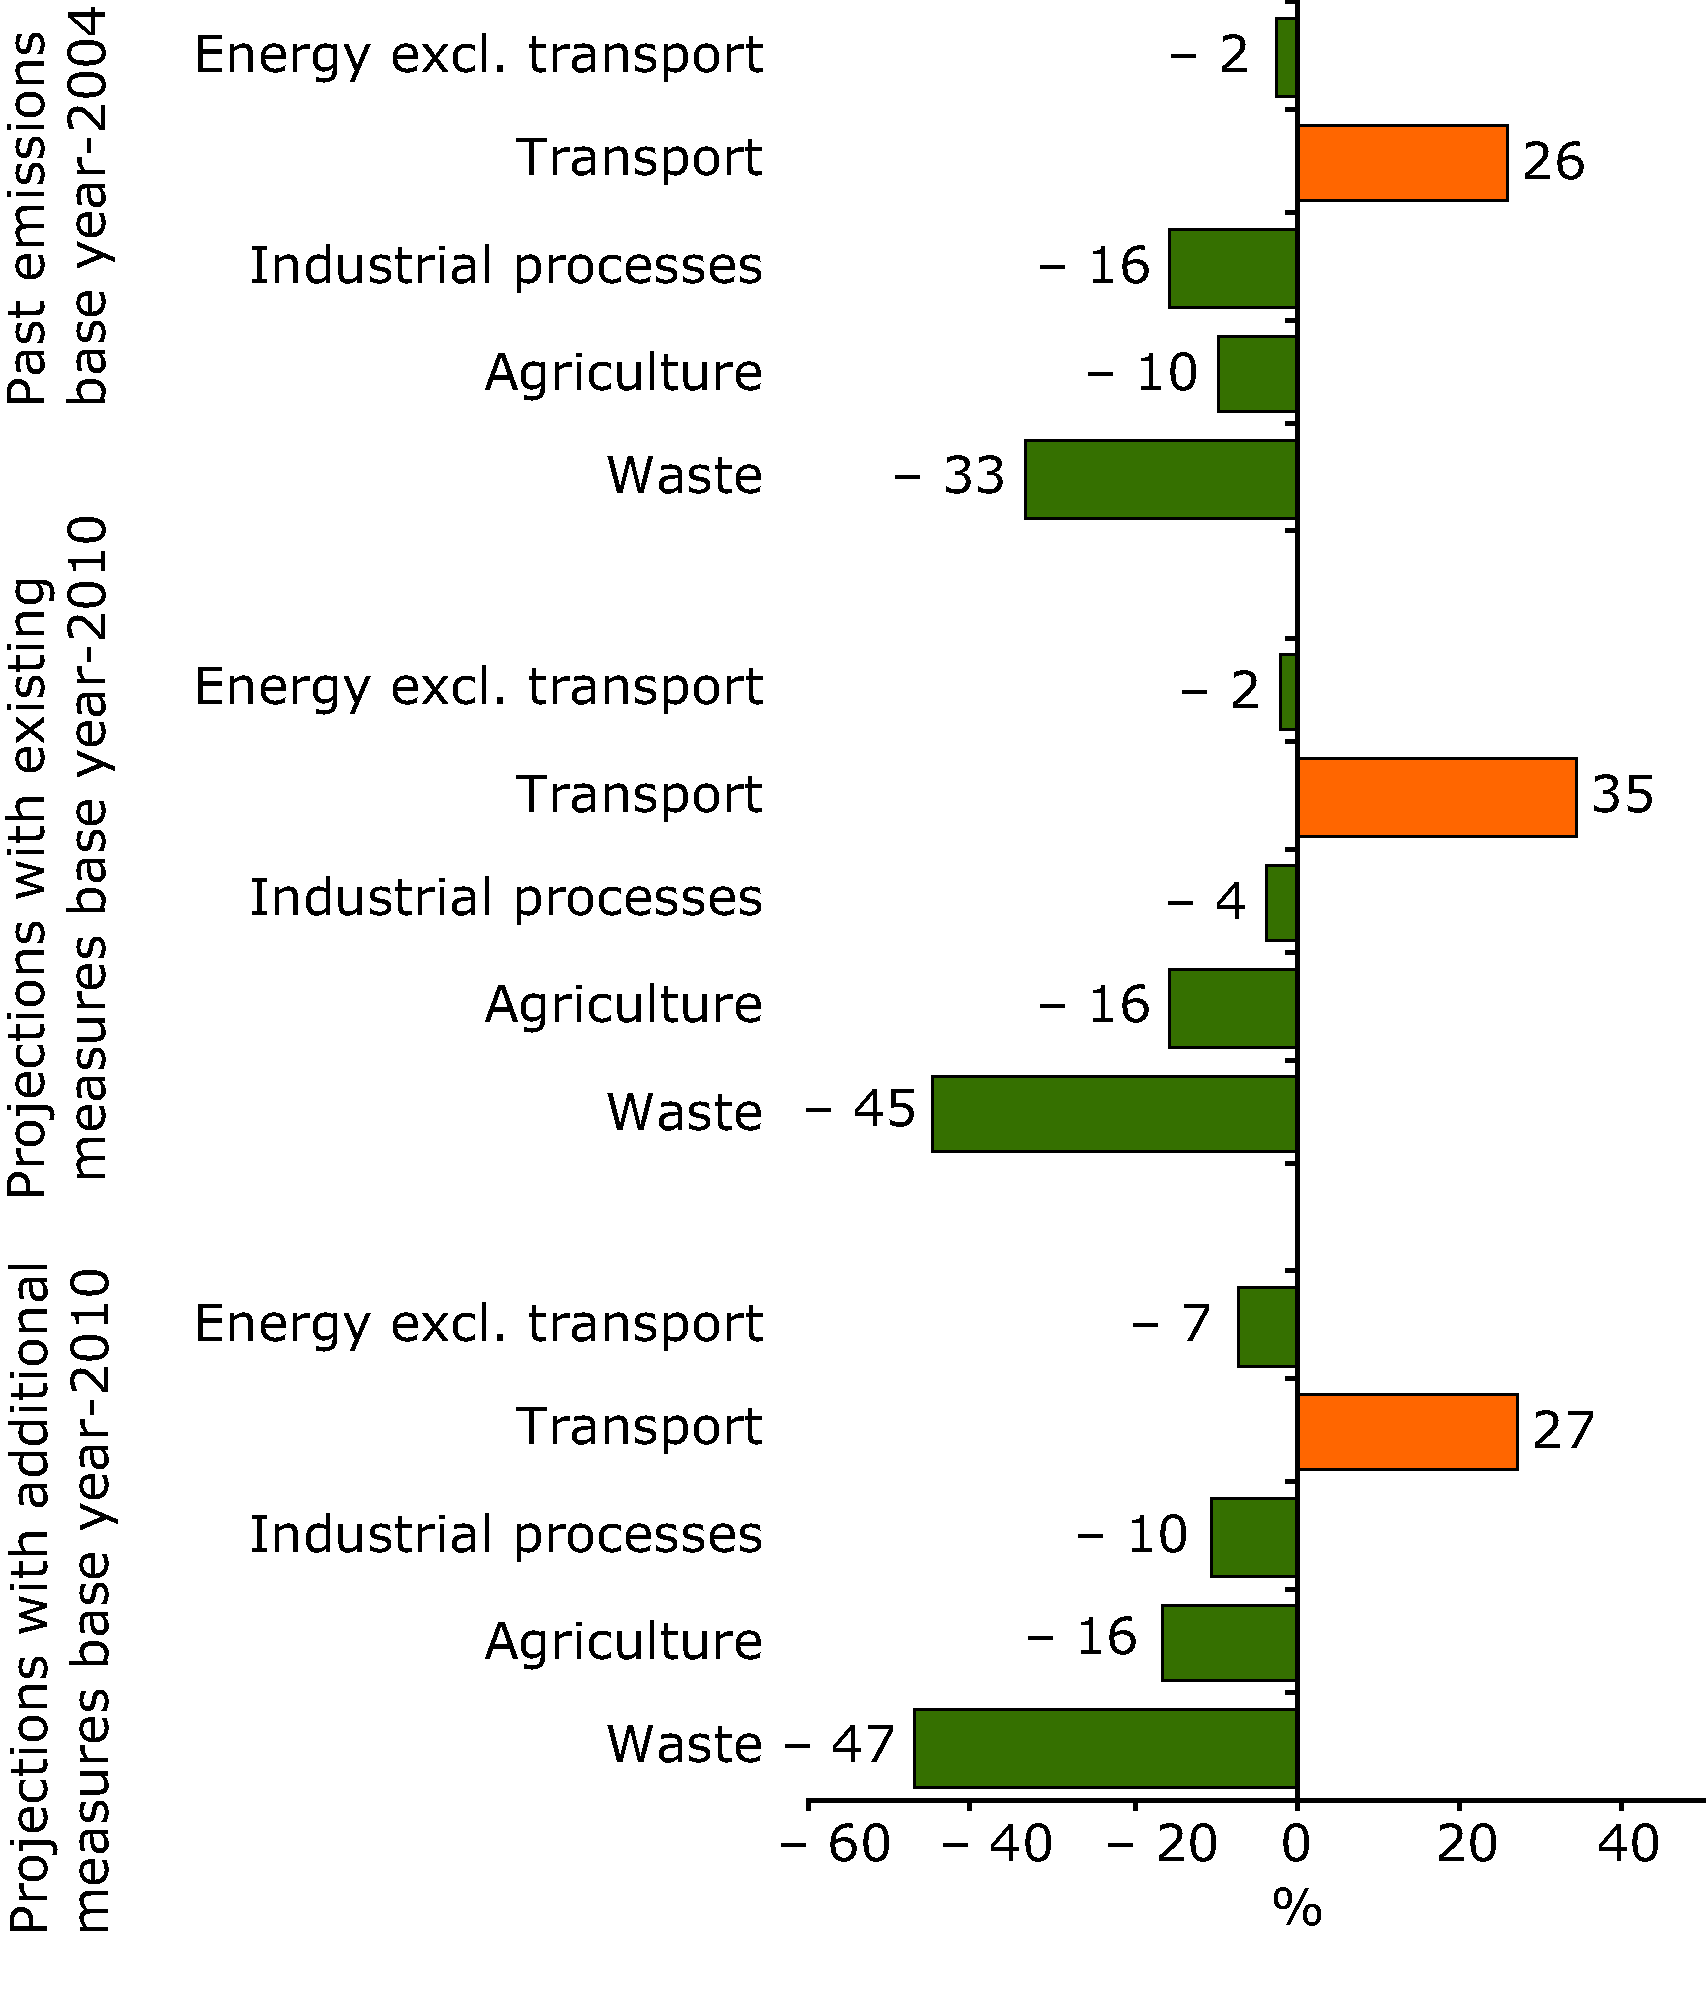 Changes in EU-15 greenhouse gas emissions by sector and shares of sectors